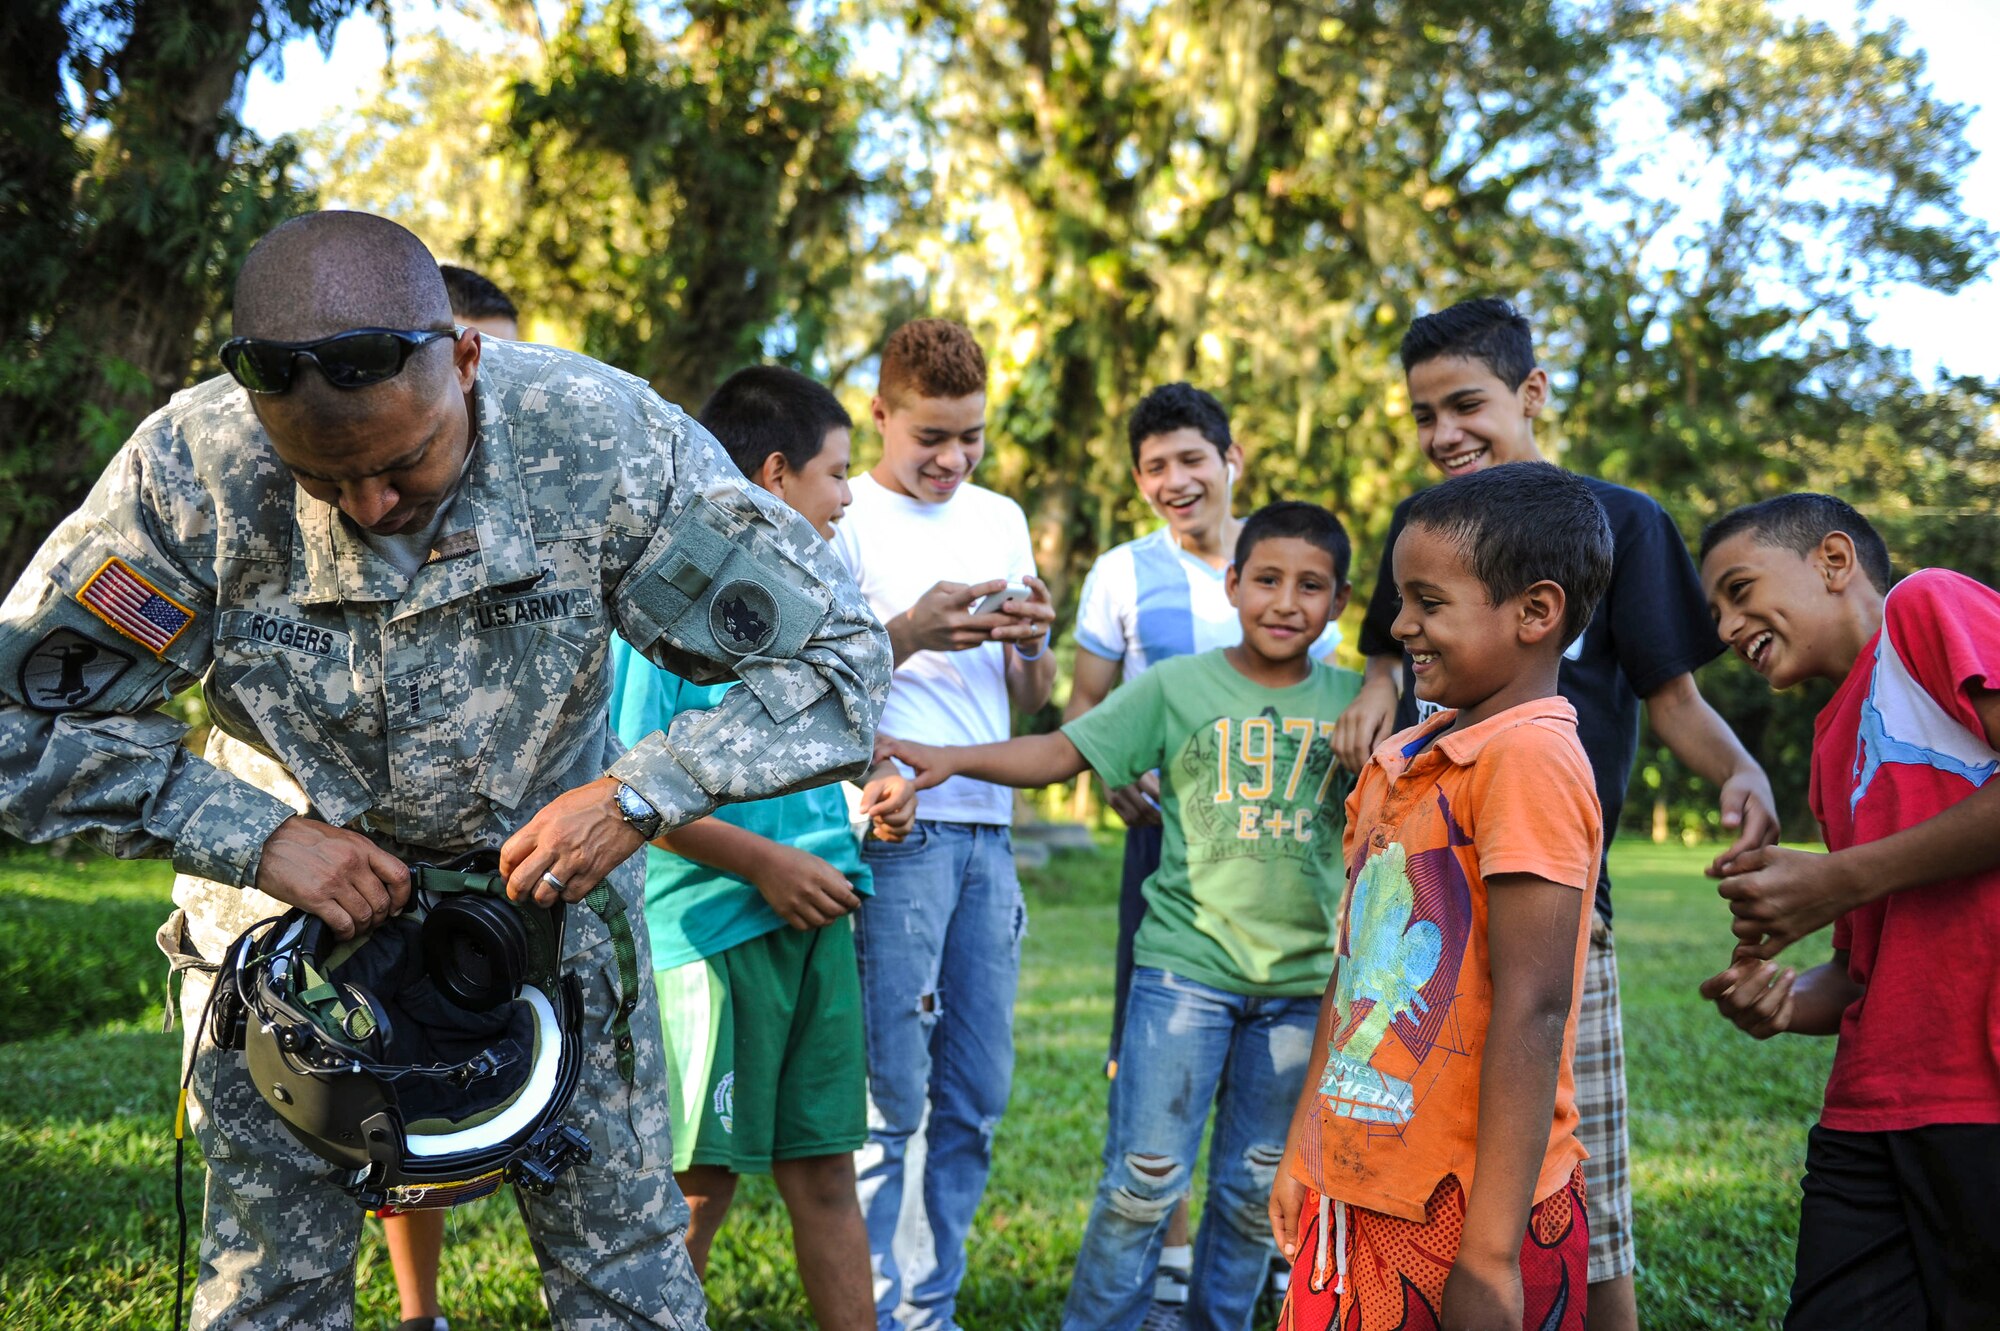 U.S. Army Chief Warrant Officer 4 Ronald Rodgers, 1-228th Aviation Regiment battalion safety officer, adjusts his helmet for a young boy to try at Lake Yojoa, Honduras, Jan. 22, 2015.   The 1-228th Avn. Reg. partnered with U.S. Army Special Operations personnel to practice recovering live personnel. The over-water hoist training was held to ensure members of Joint Task Force-Bravo are planning and preparing for crisis and contingency response, as well as countering transnational organized crime, and counterterrorism operations as part of U.S. Southern Command’s mission. Contingency planning prepares the command for various scenarios that pose the greatest probability of challenging our regional partners or threatening our national interests. (U.S. Air Force photo/Tech. Sgt. Keola Soon)